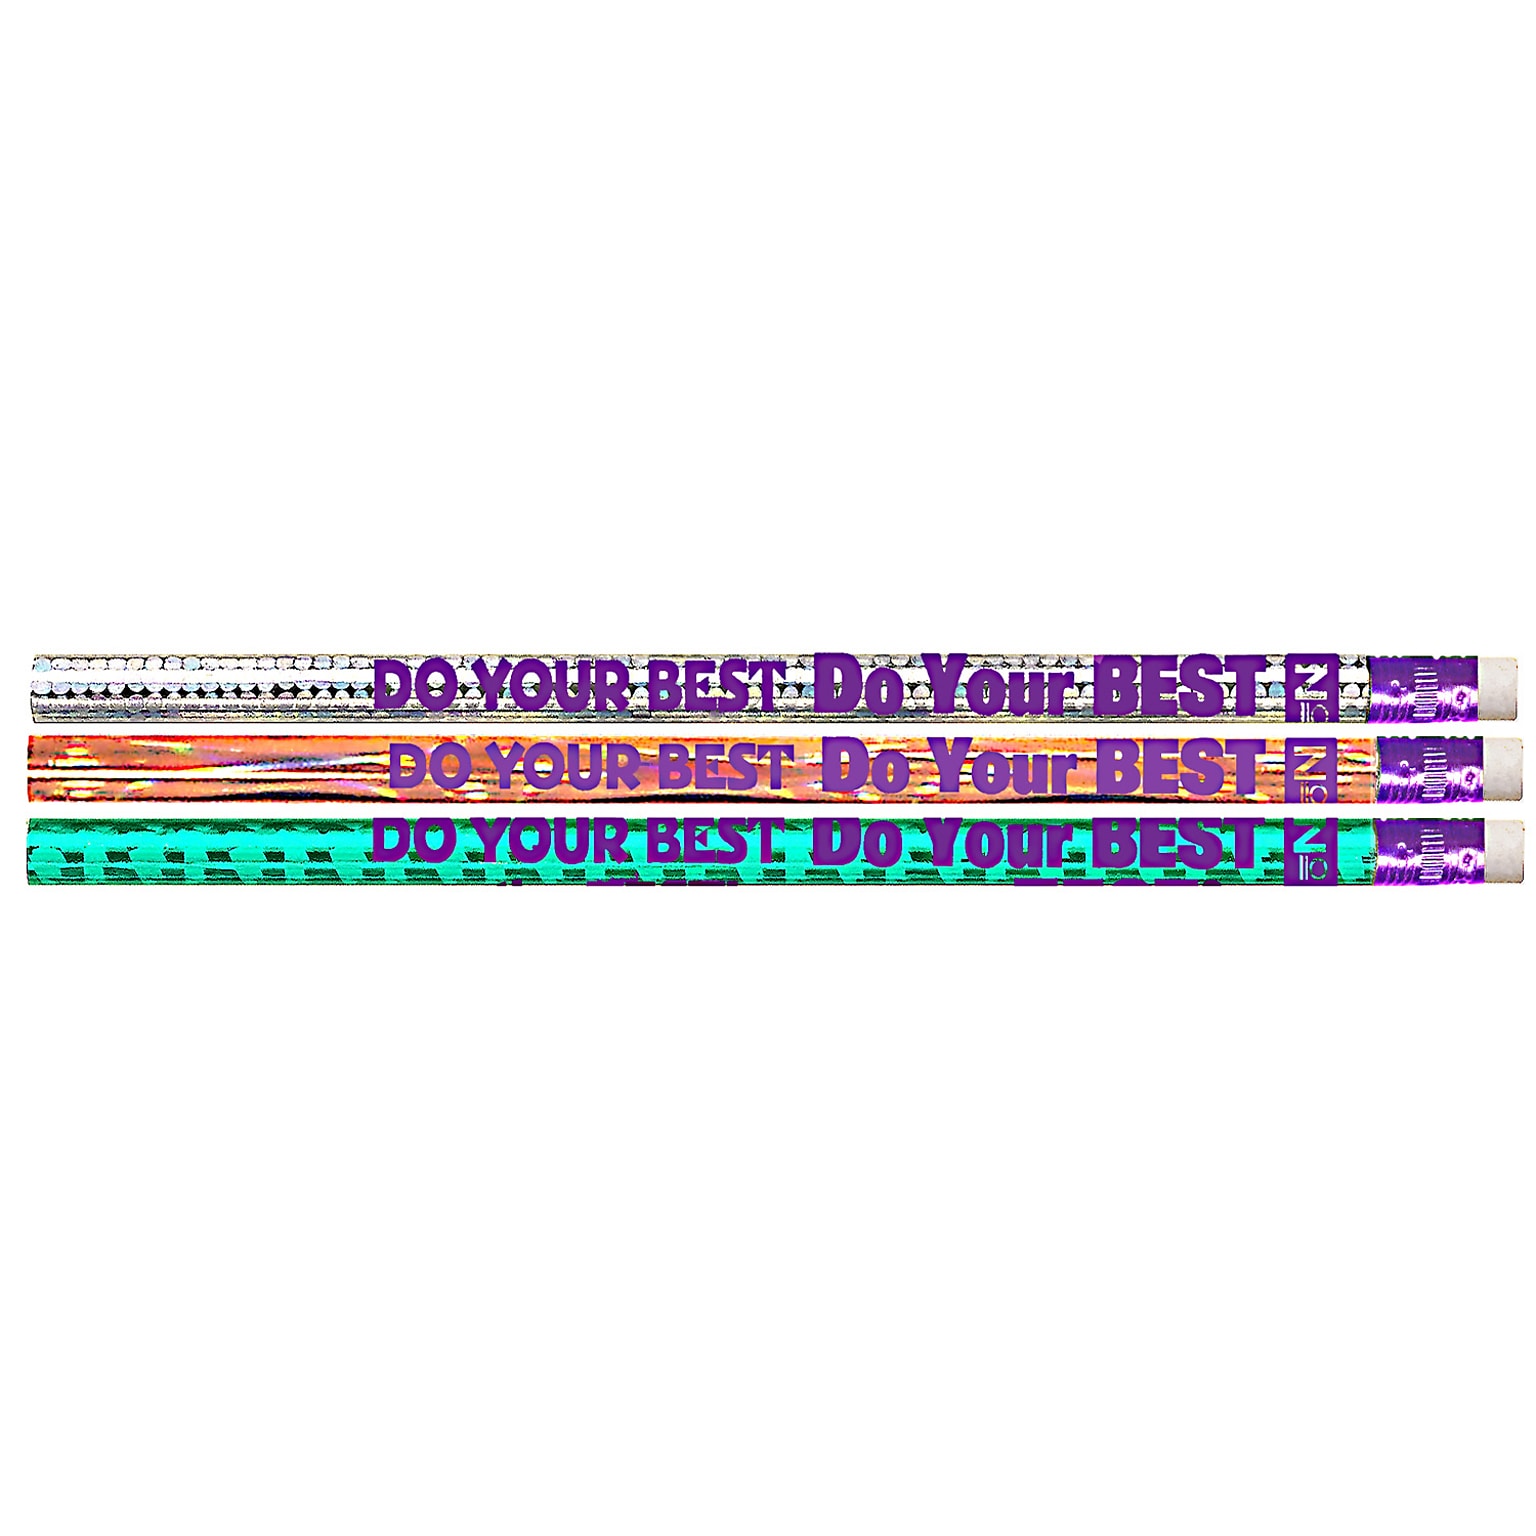 Musgrave Pencil Company Do Your Best On The Test Motivational/Fun Pencils, 12 Per Pack, 12 Packs (MUS1536D-12)